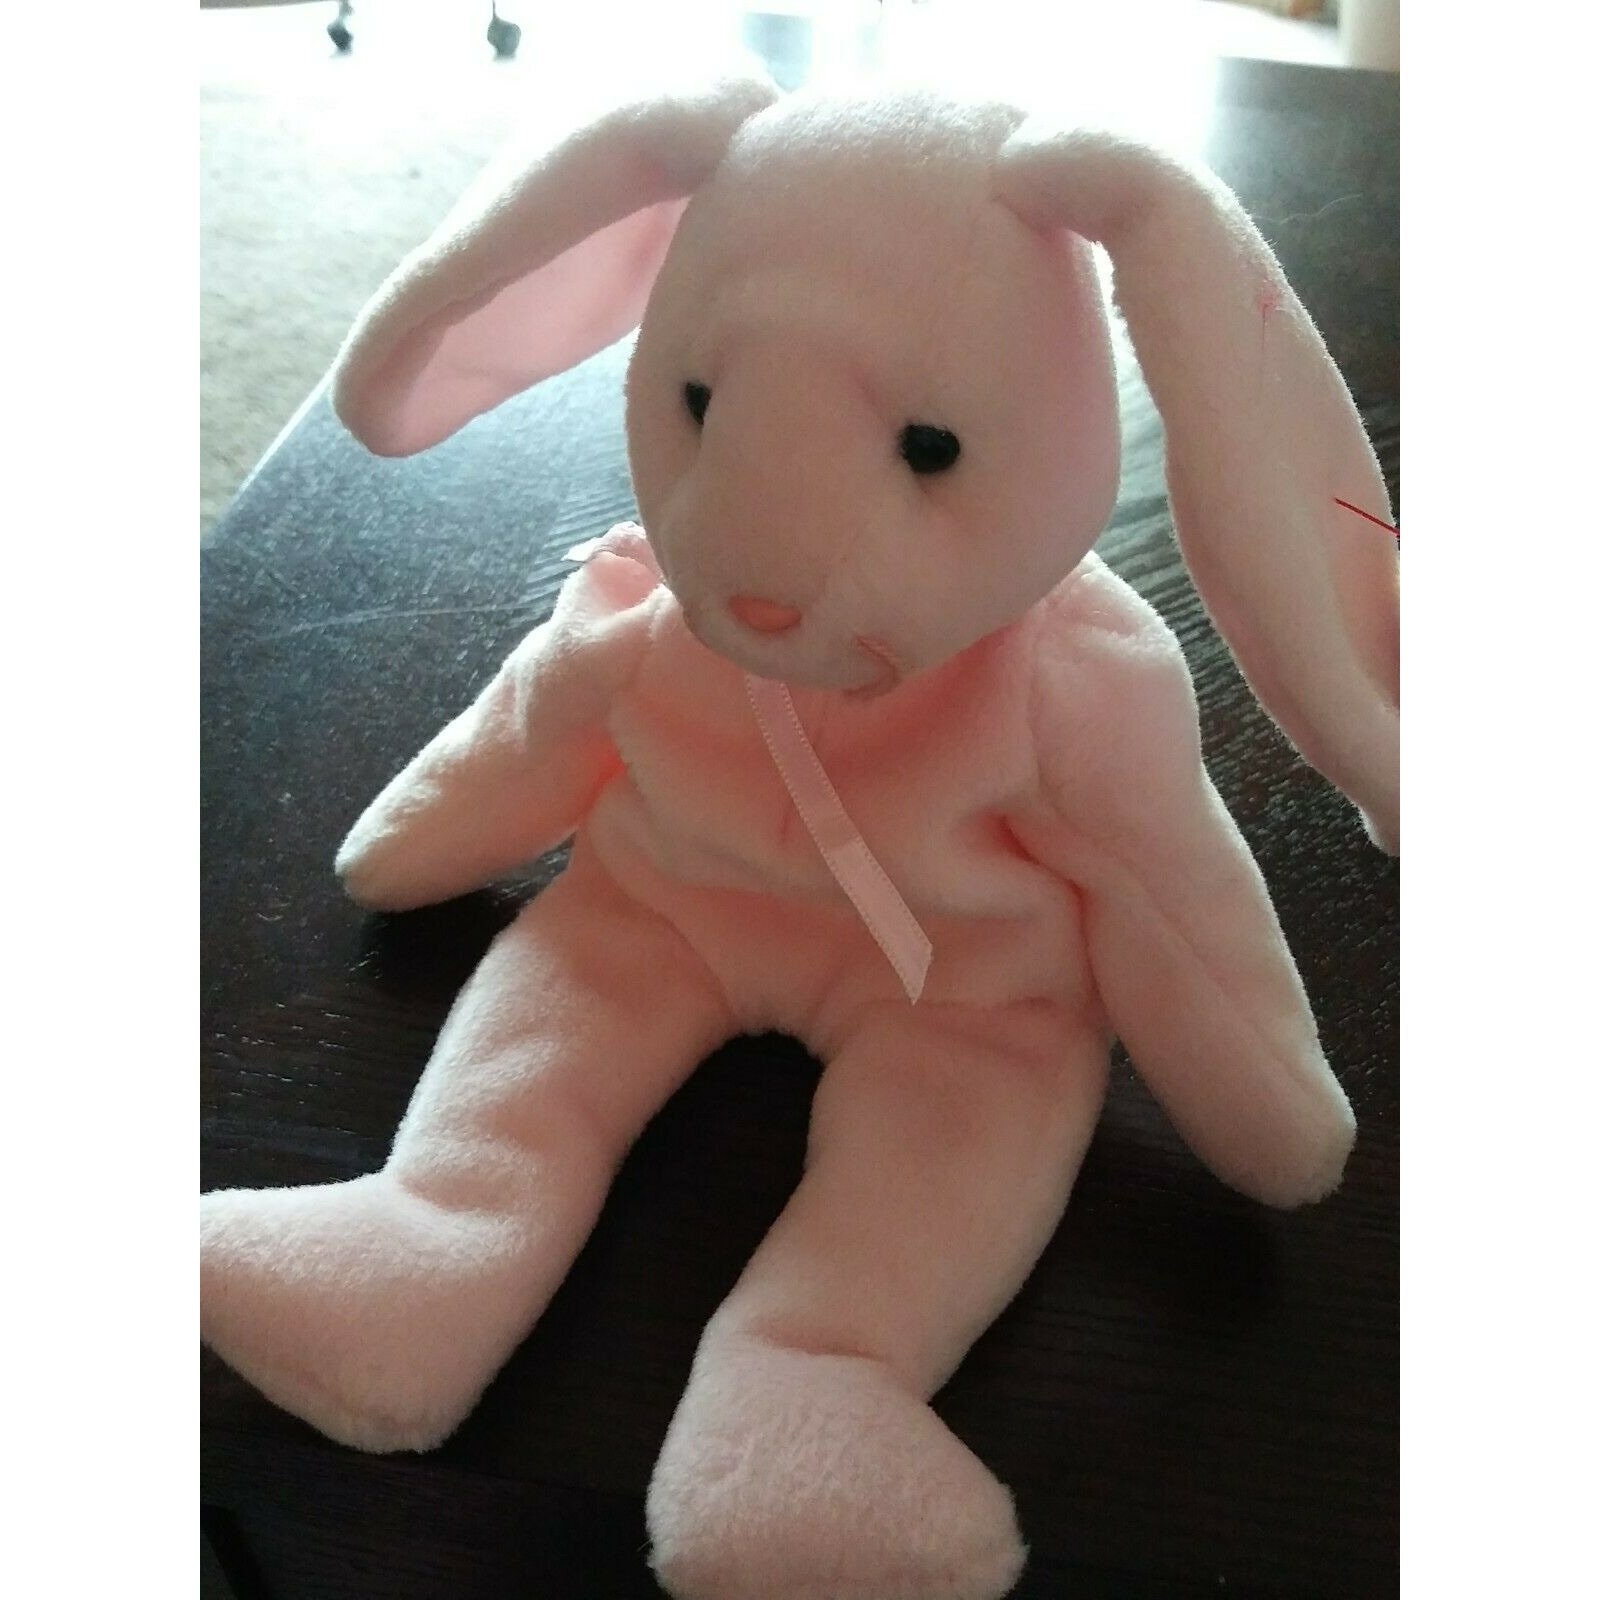 Pink for sale online Ty 4117 Beanie Babies Hoppity Rabbit 